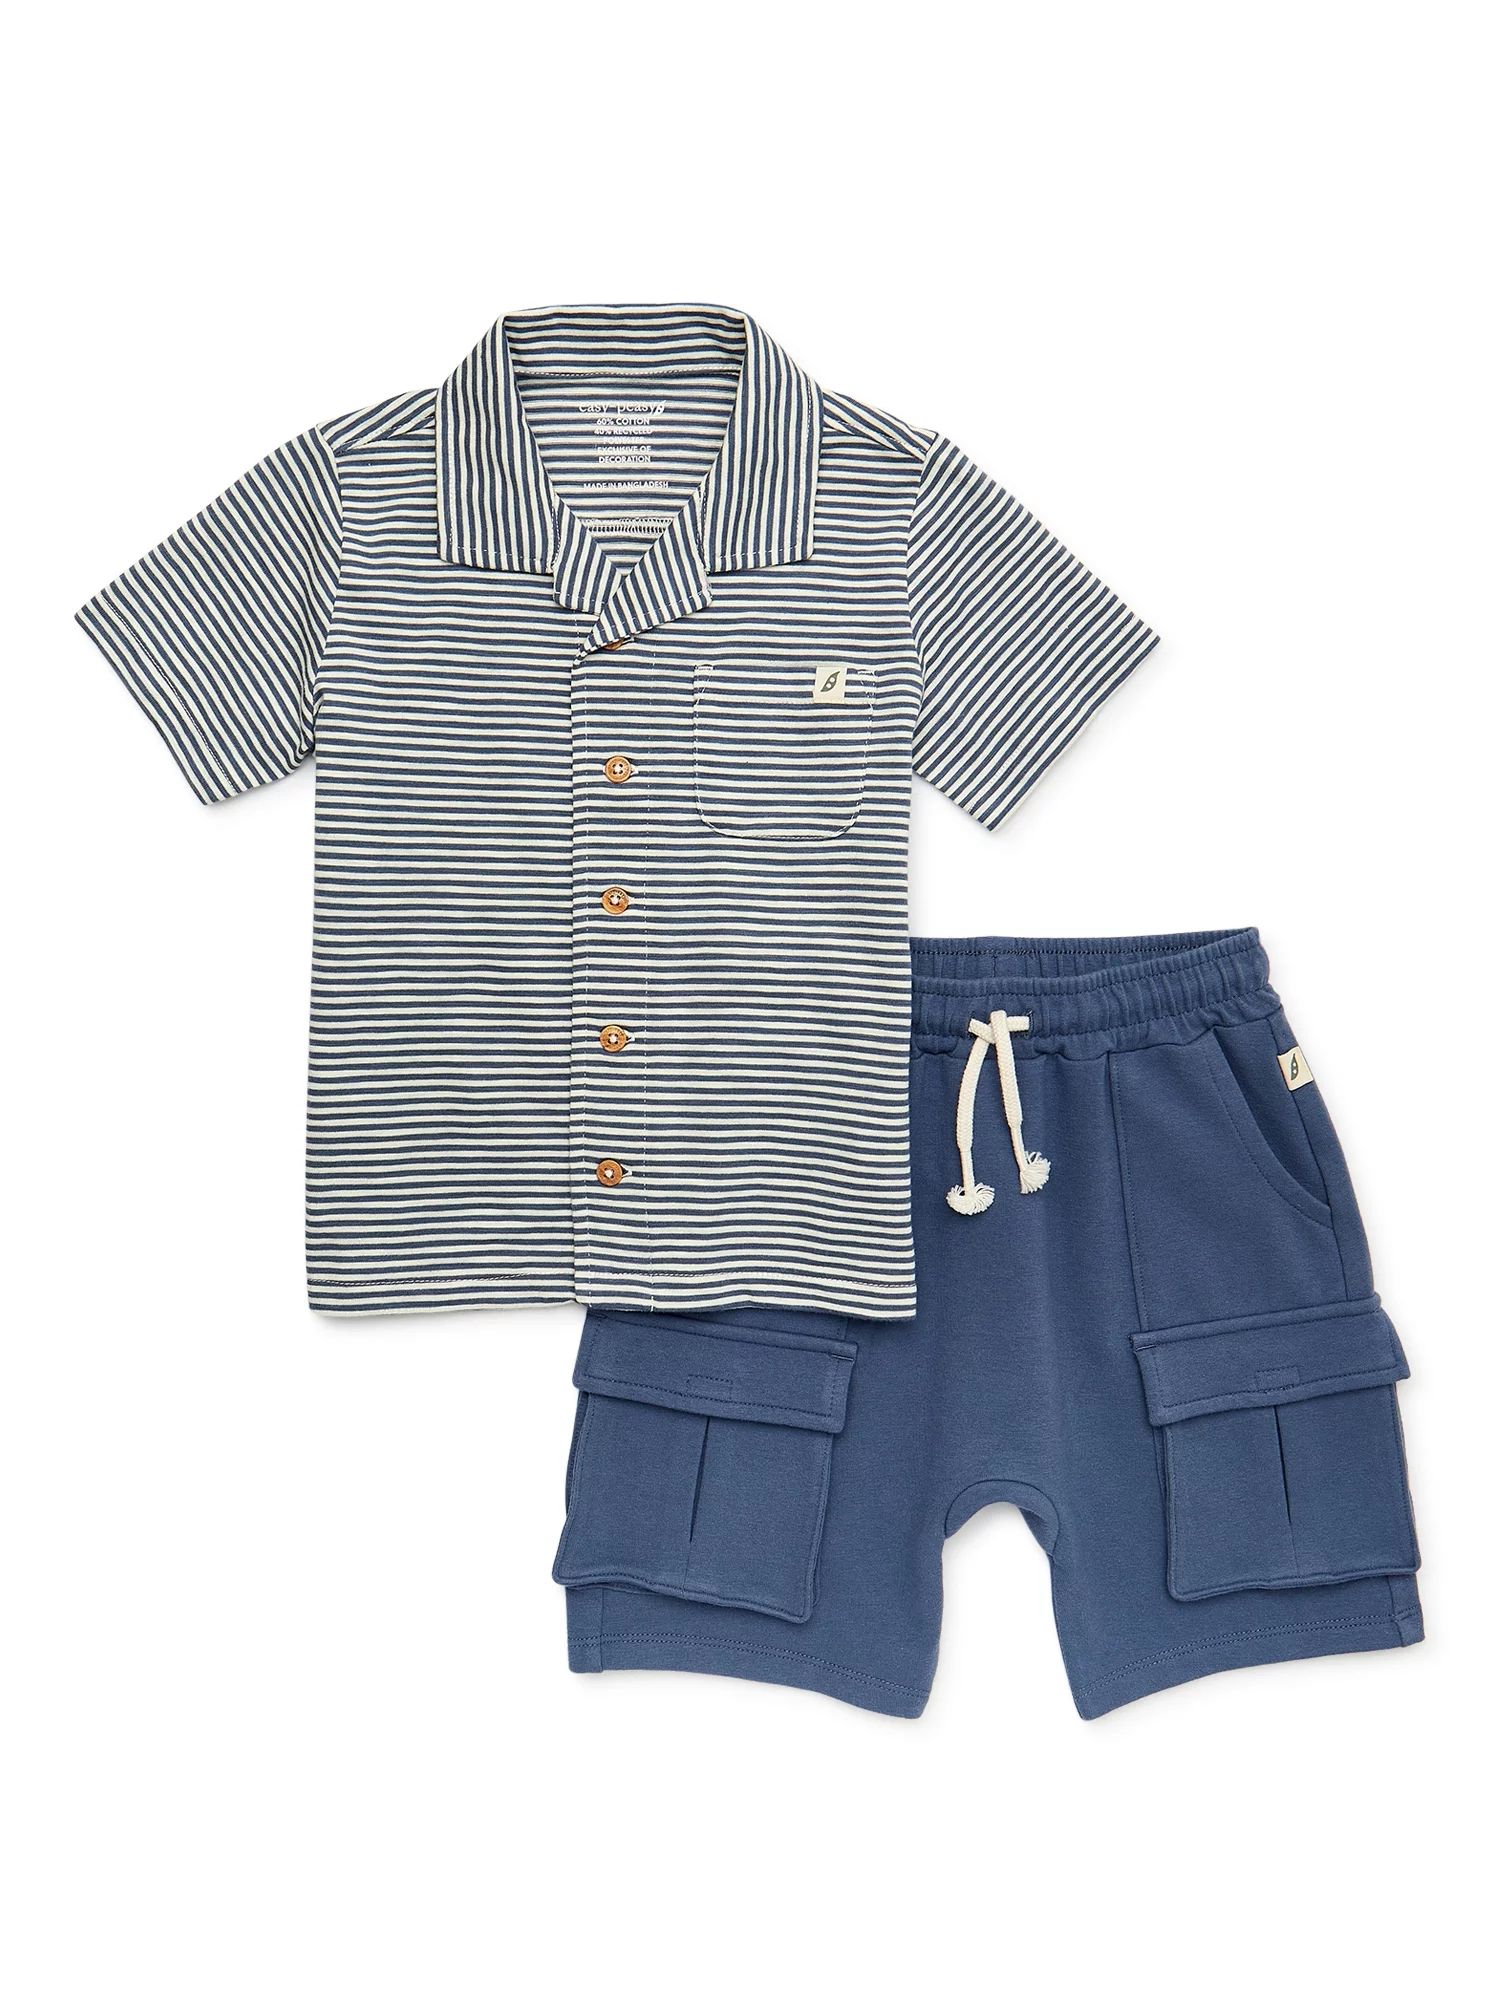 easy-peasy Baby and Toddler Boys Camp Shirt and Shorts Outfit Set, 2-Piece, Sizes 12M-5T | Walmart (US)